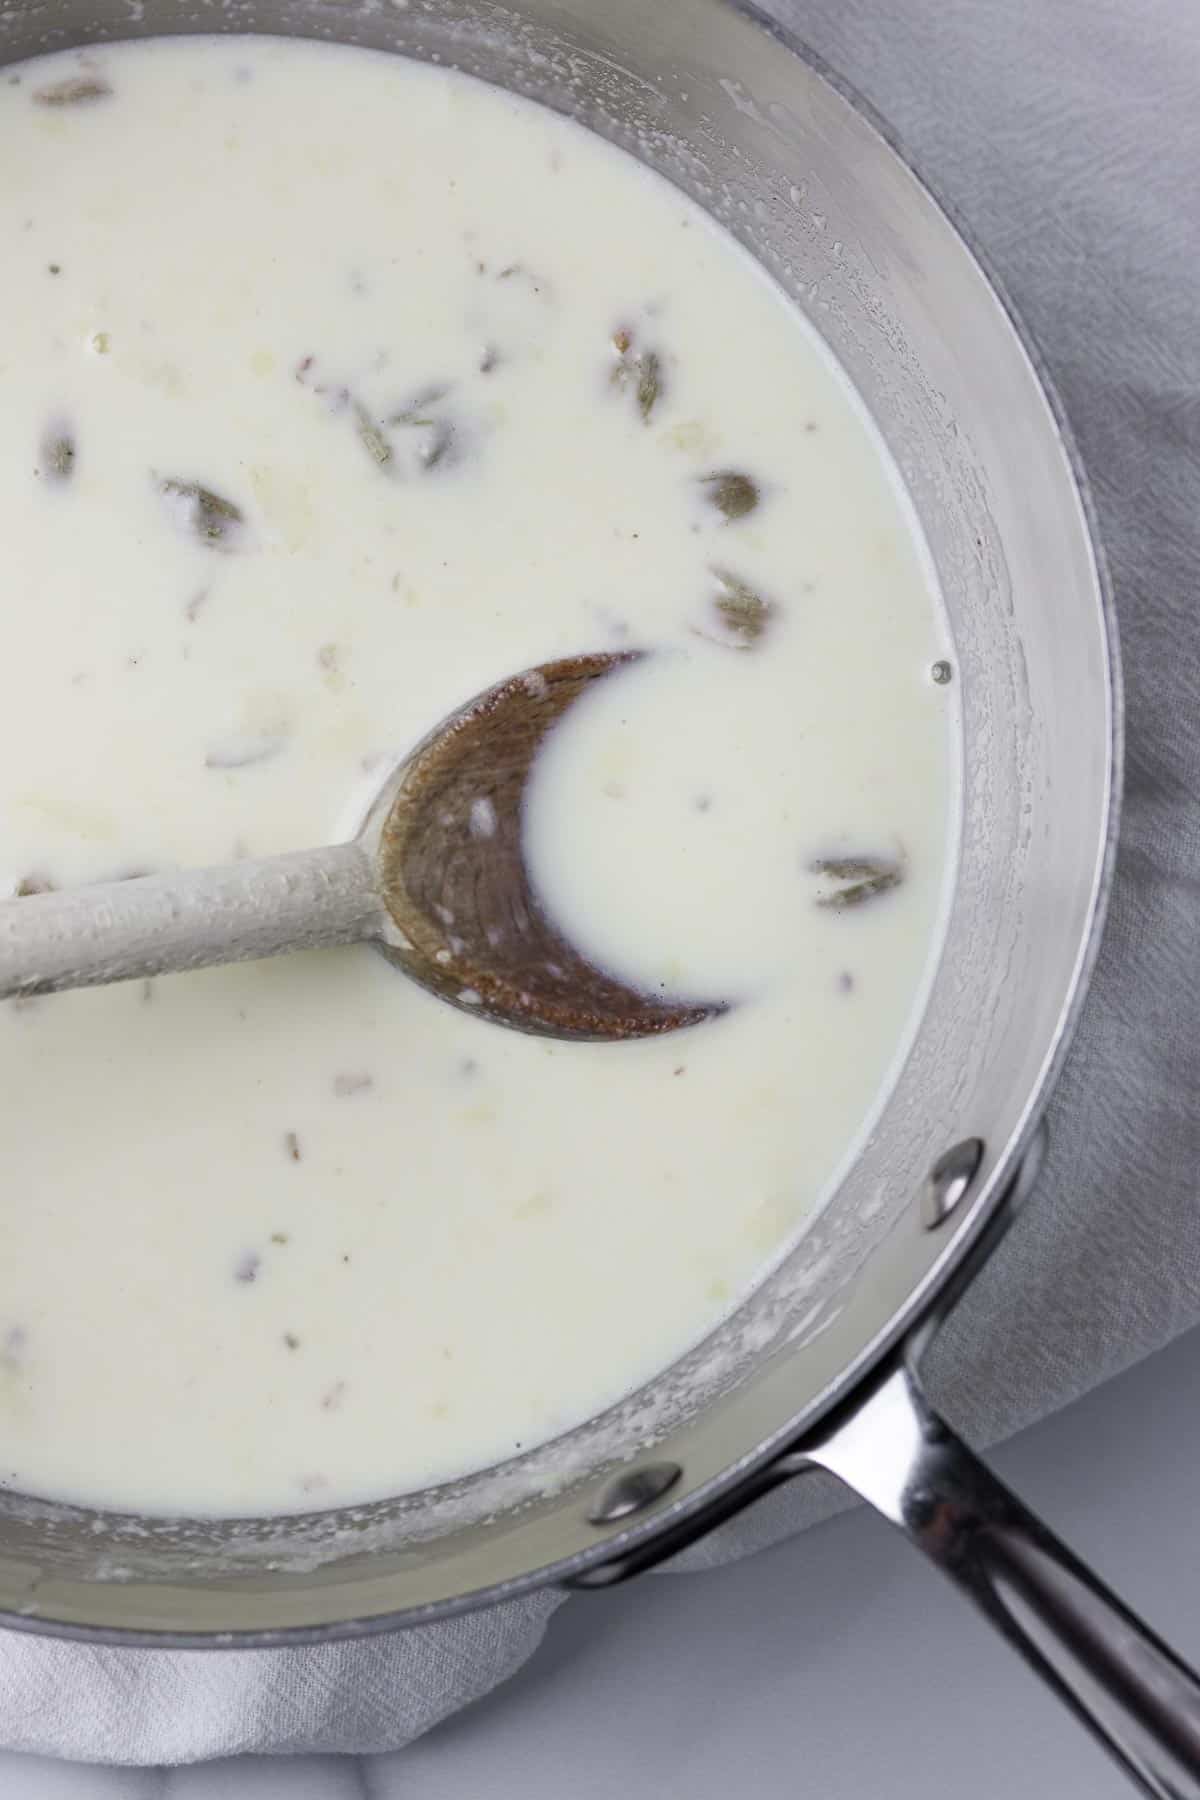 Cream, milk and cardamom pods in a saucepan with a wooden spoon.